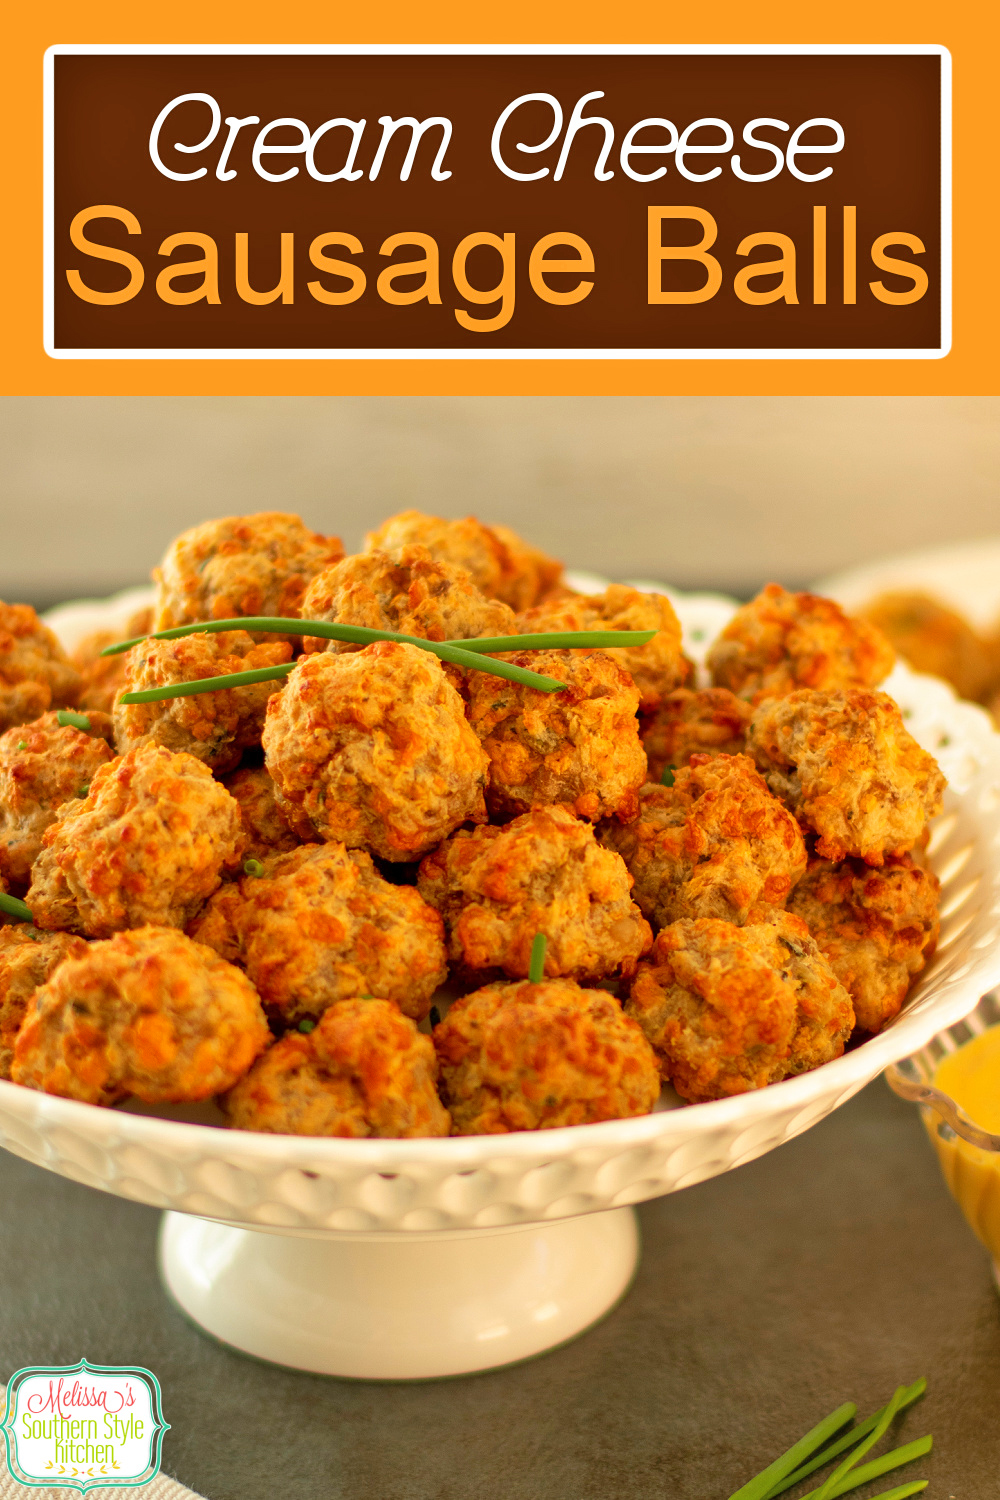 These two-bite Cream Cheese Sausage Balls can be served as an appetizer or for breakfast and brunch with a variety of sauces for dipping. #sasuagerecipes #sausageballs #creamcheesesausageballs #cheddarsausageballs #southernappetizers #jimmydeansausage via @melissasssk